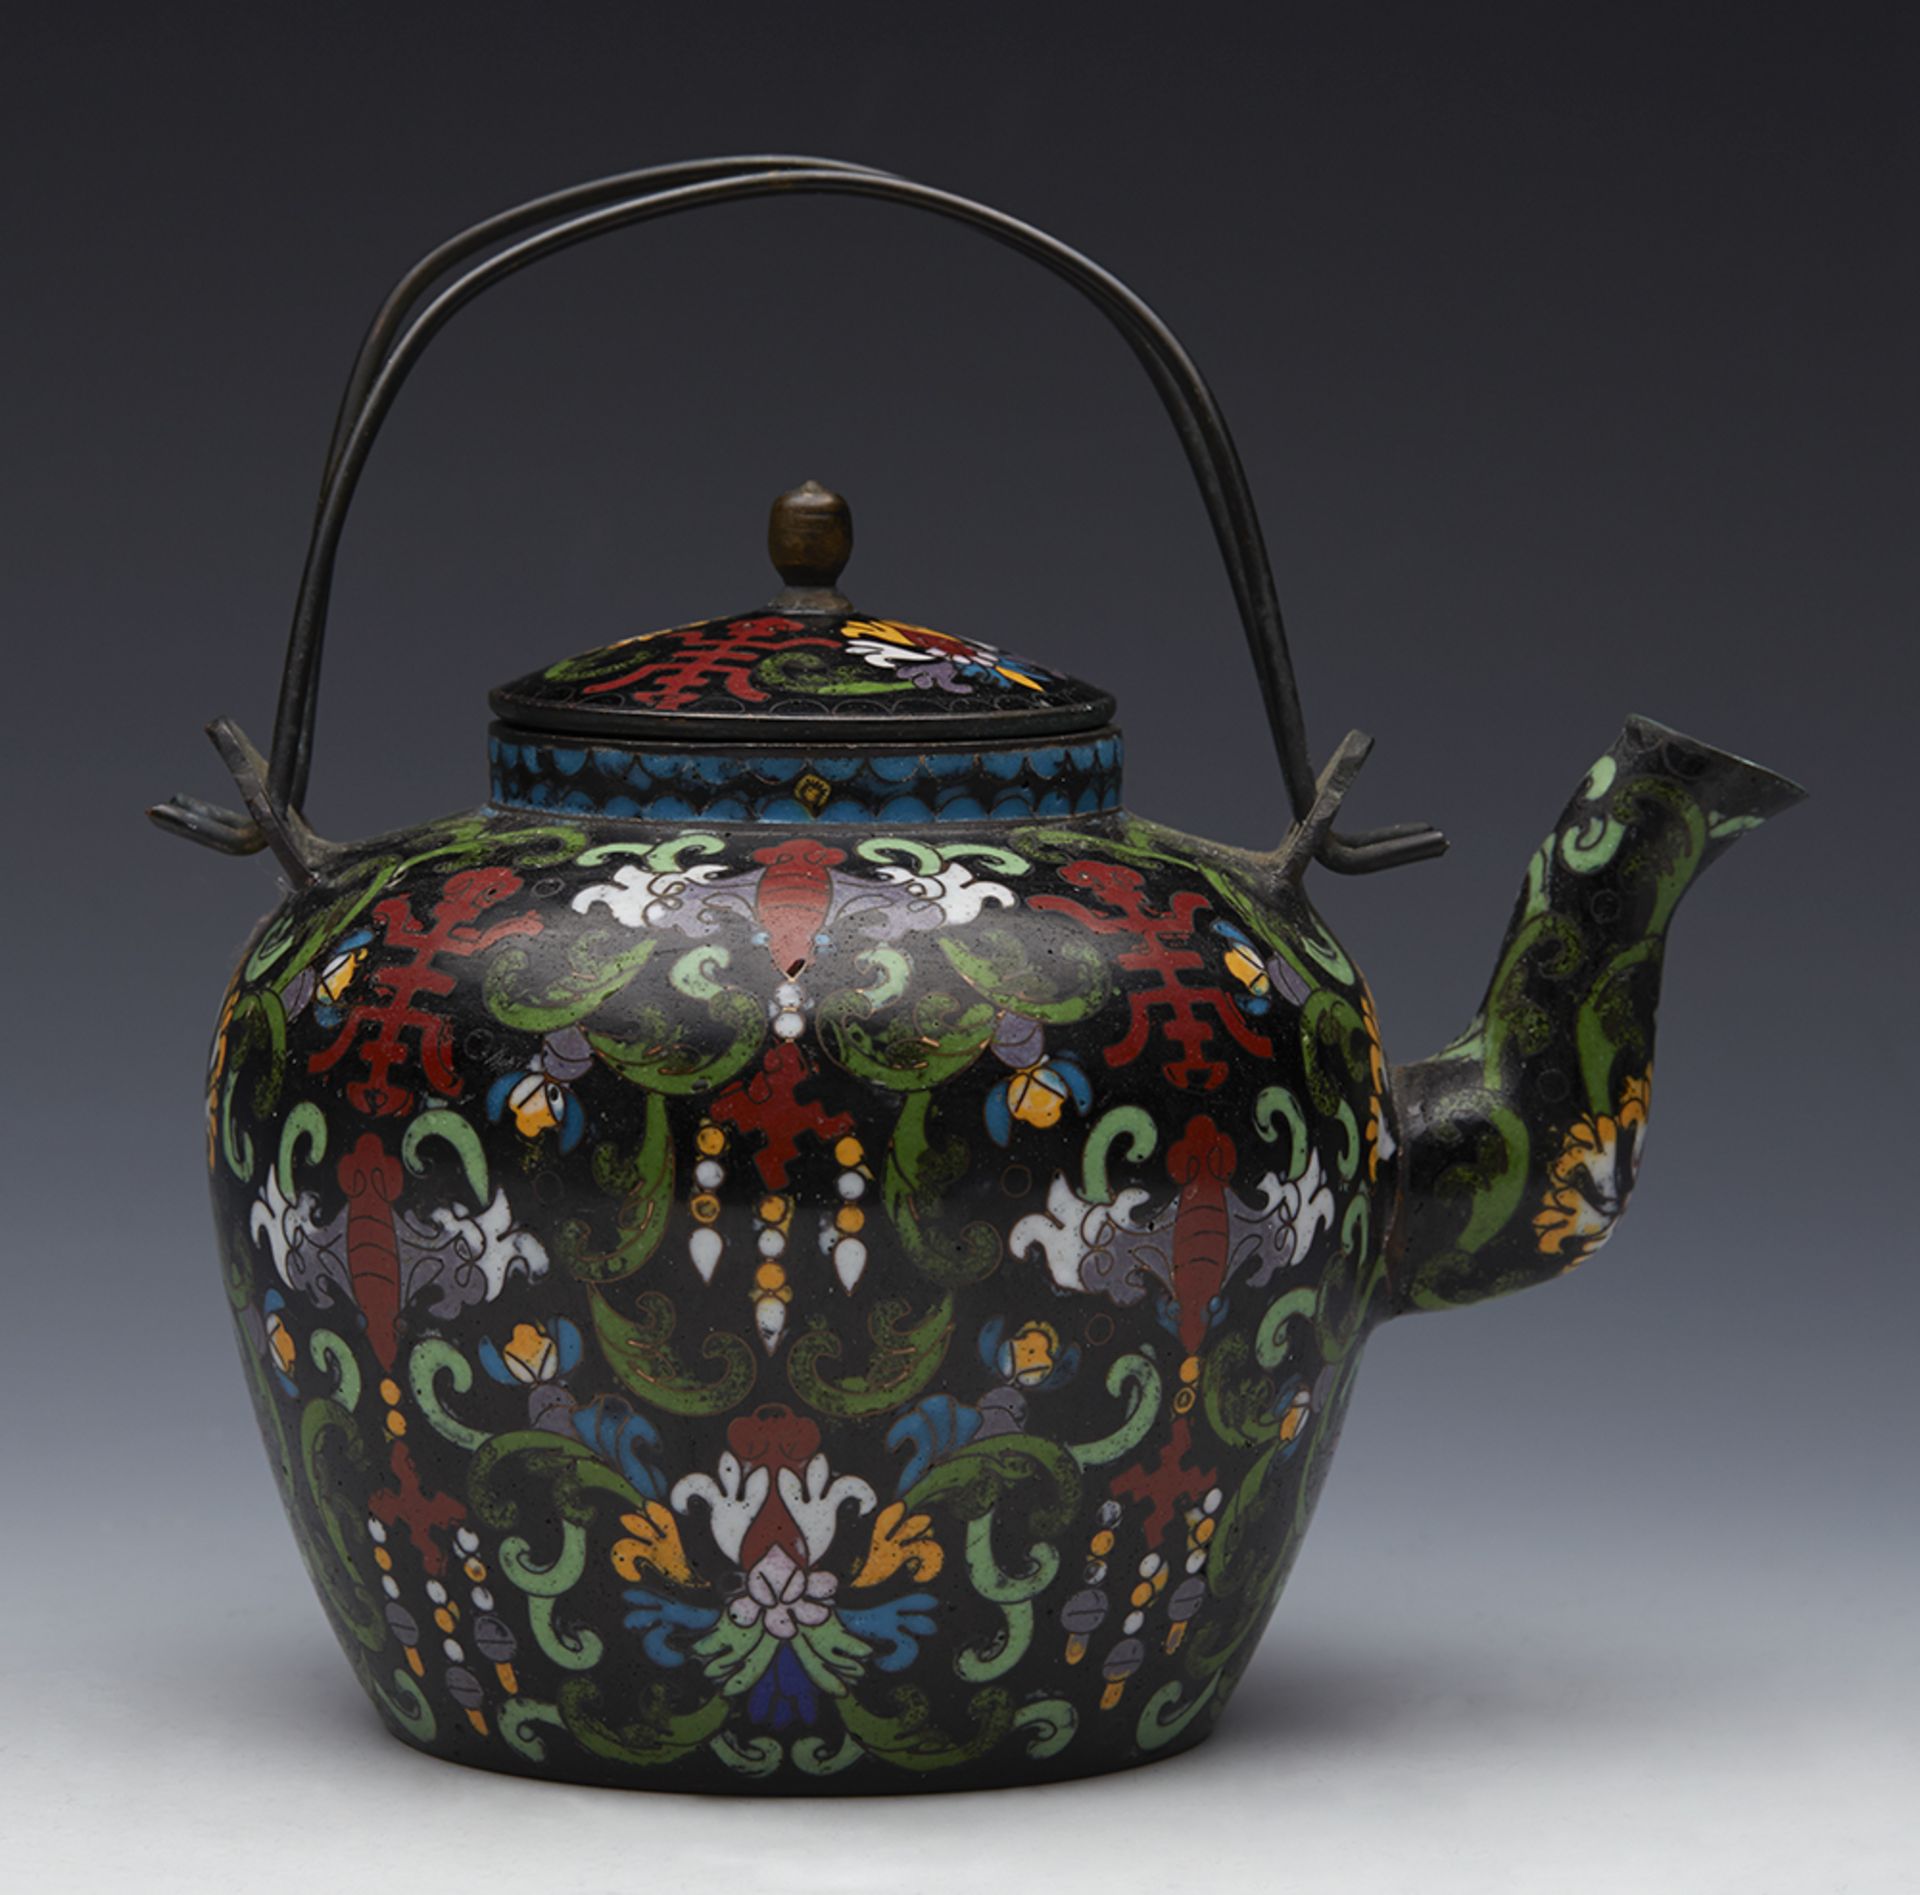 Fine Antique Chinese Qing Cloisonne Wine Pot Marked Tong Shun Tang 19Th C. - Image 5 of 10